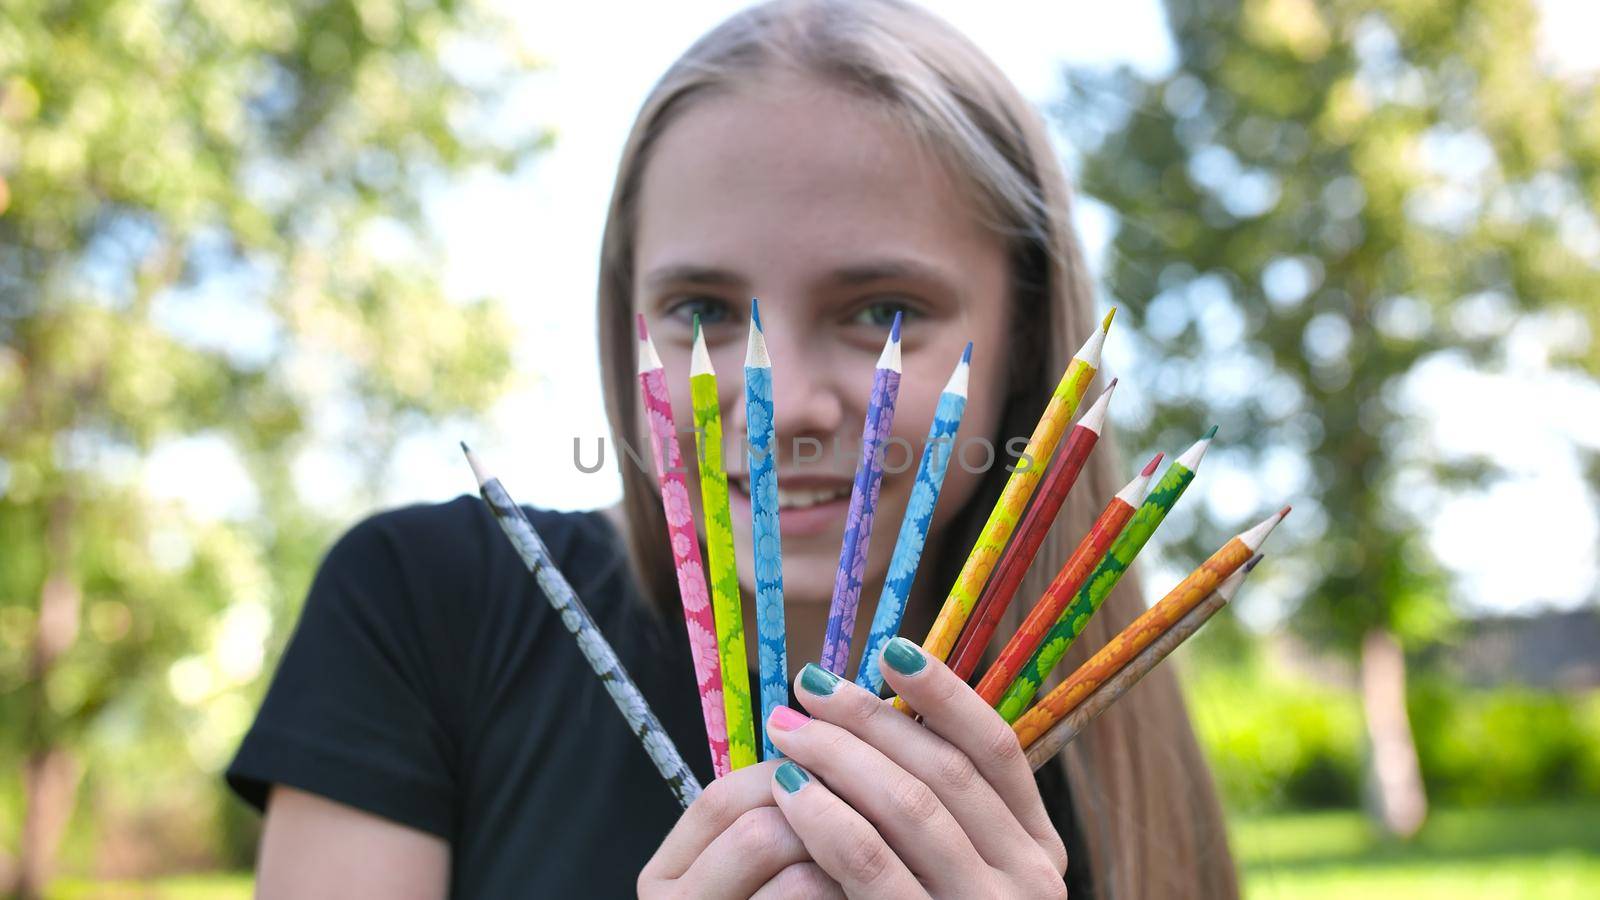 Group of multicolored pencils in young girl's hand. by DovidPro